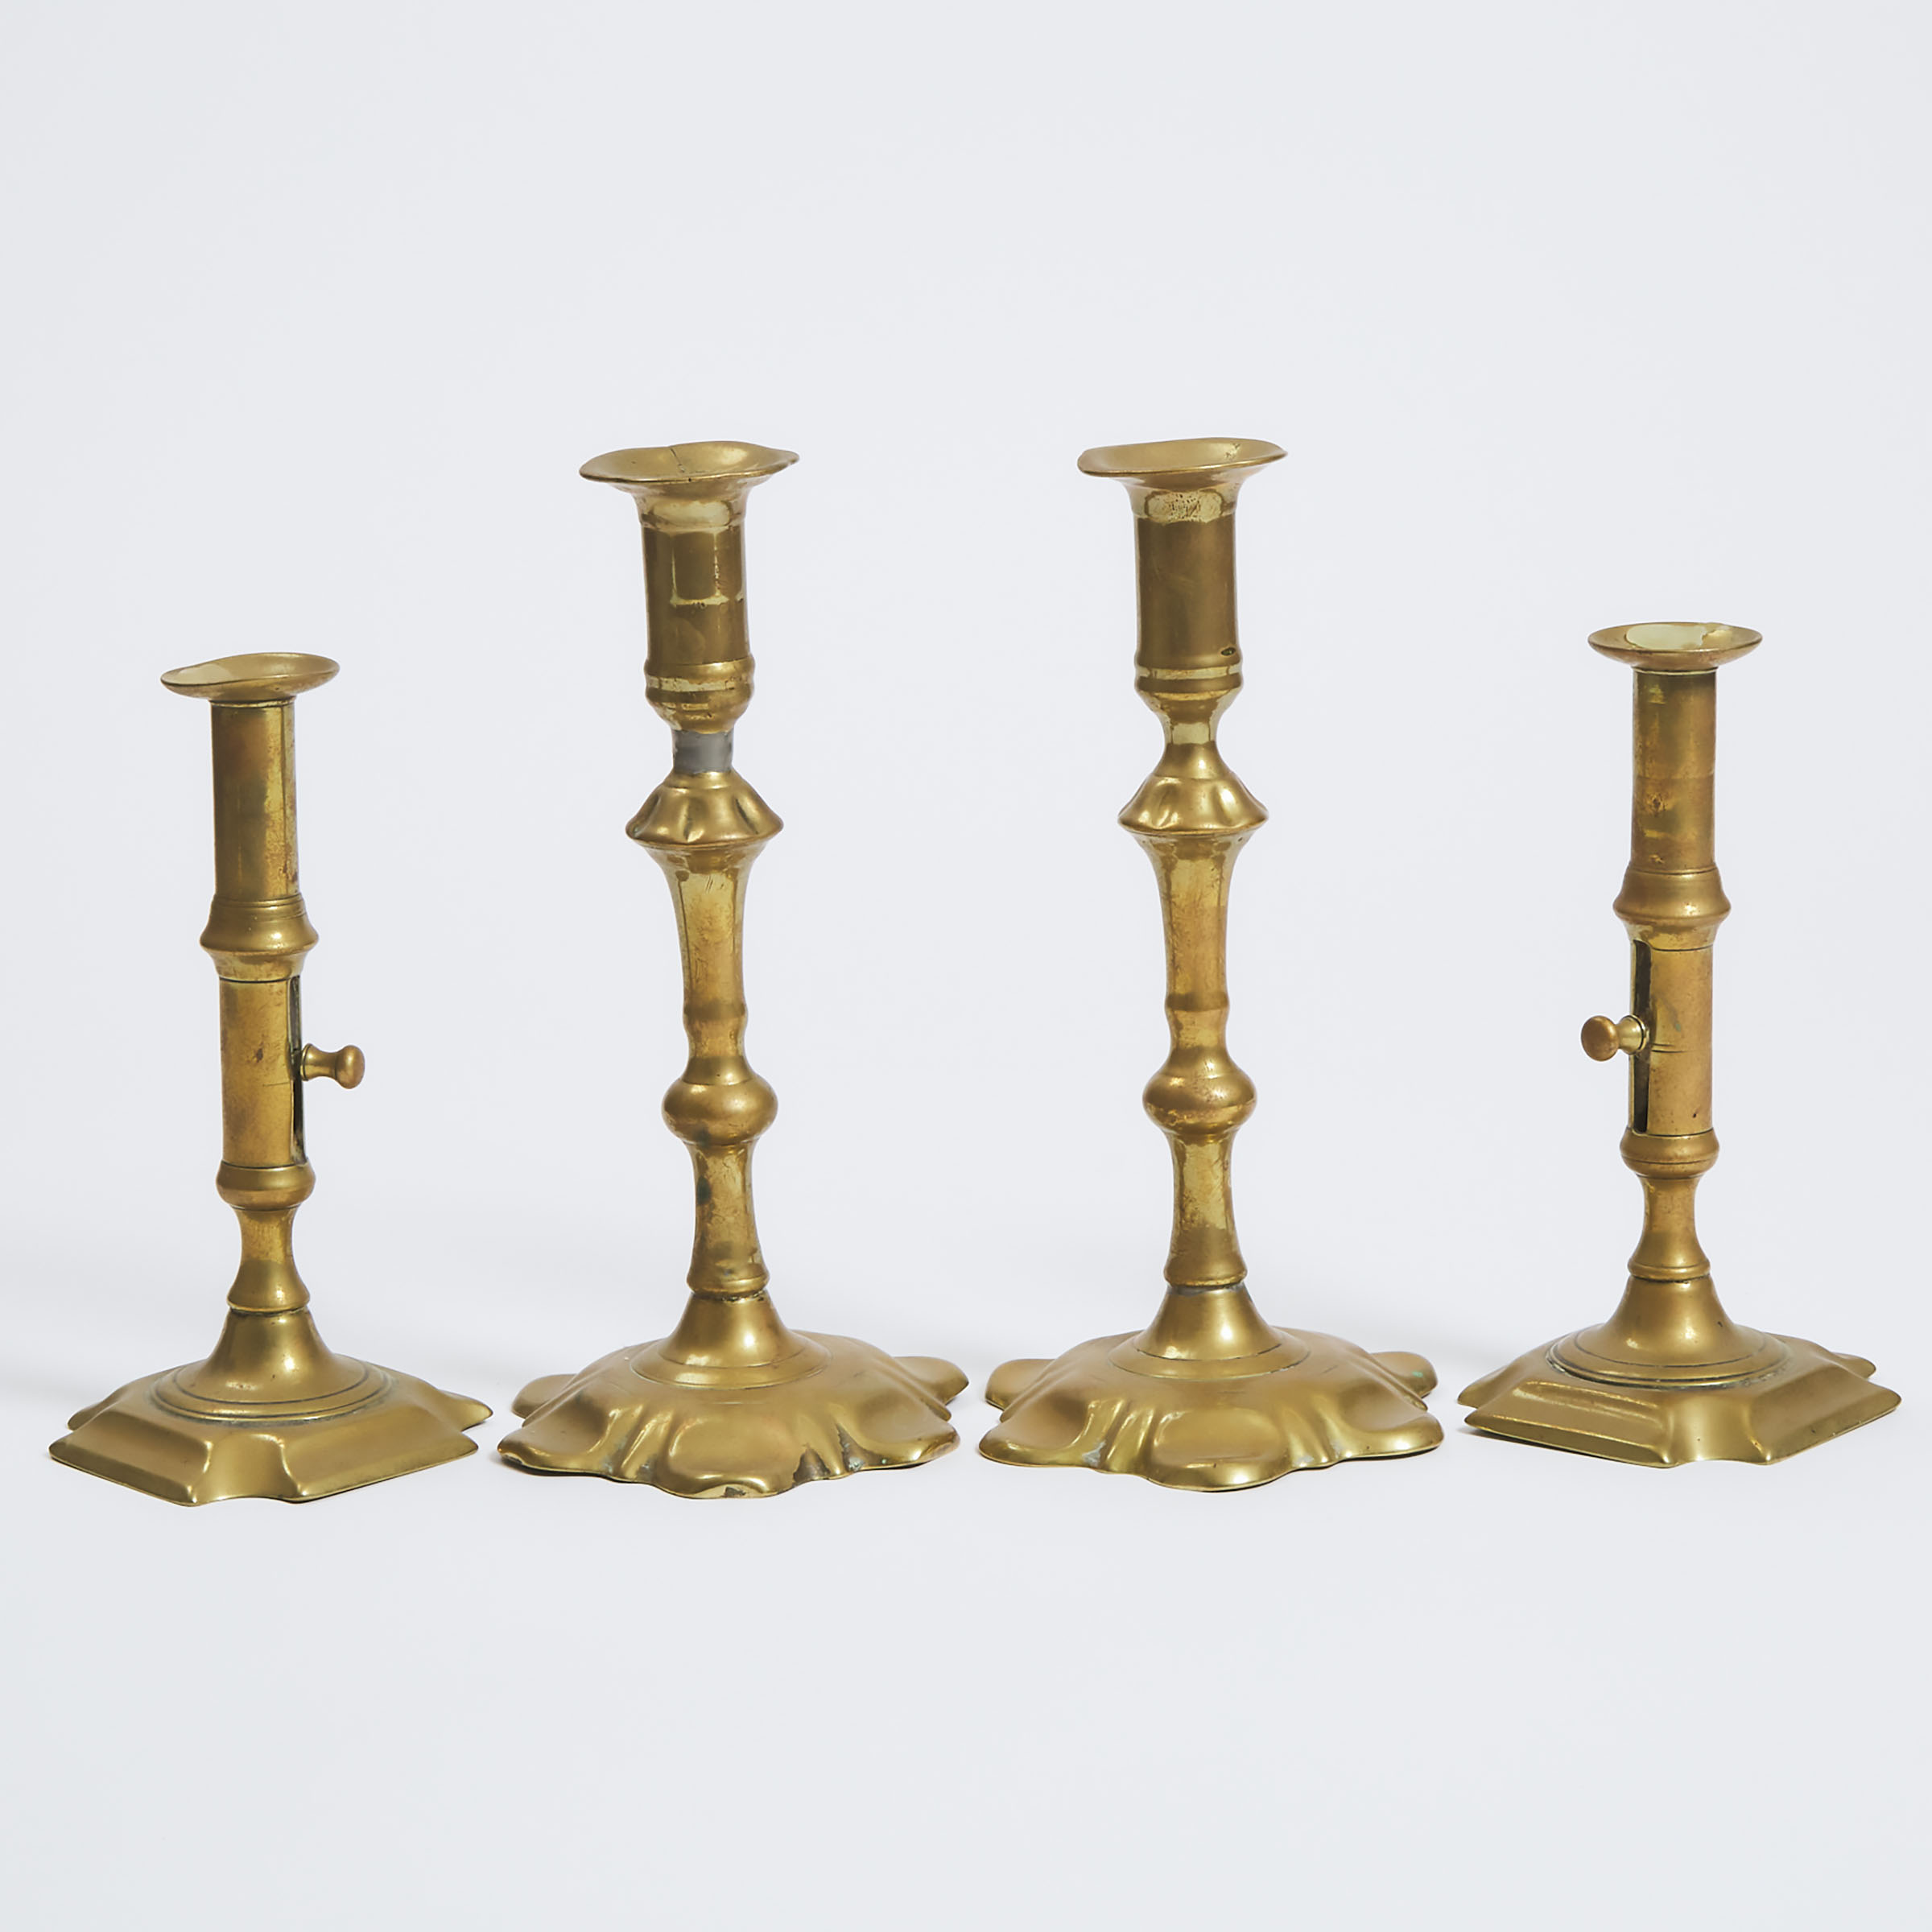 Two Pairs of English Brass Adjustable Candlesticks, 18th century